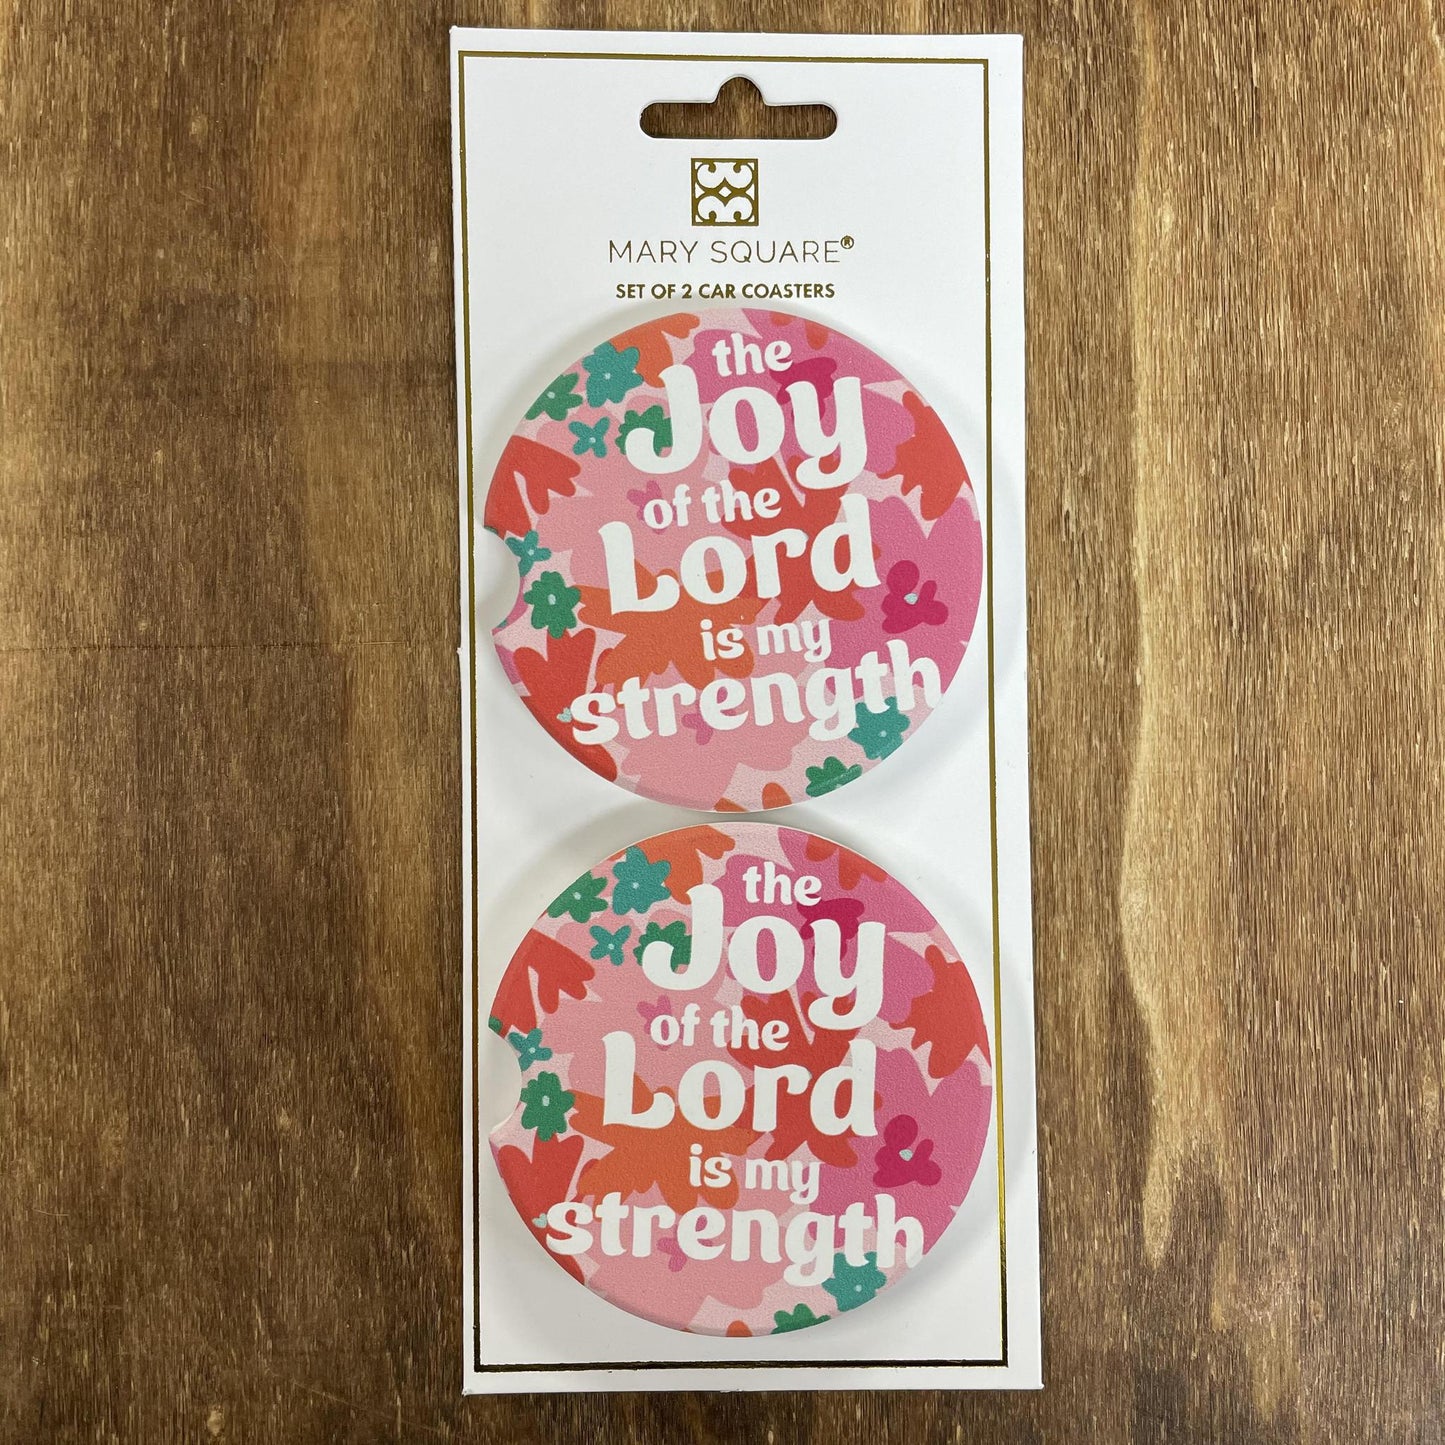 Joy of the Lord- Car Coasters- Mary Square